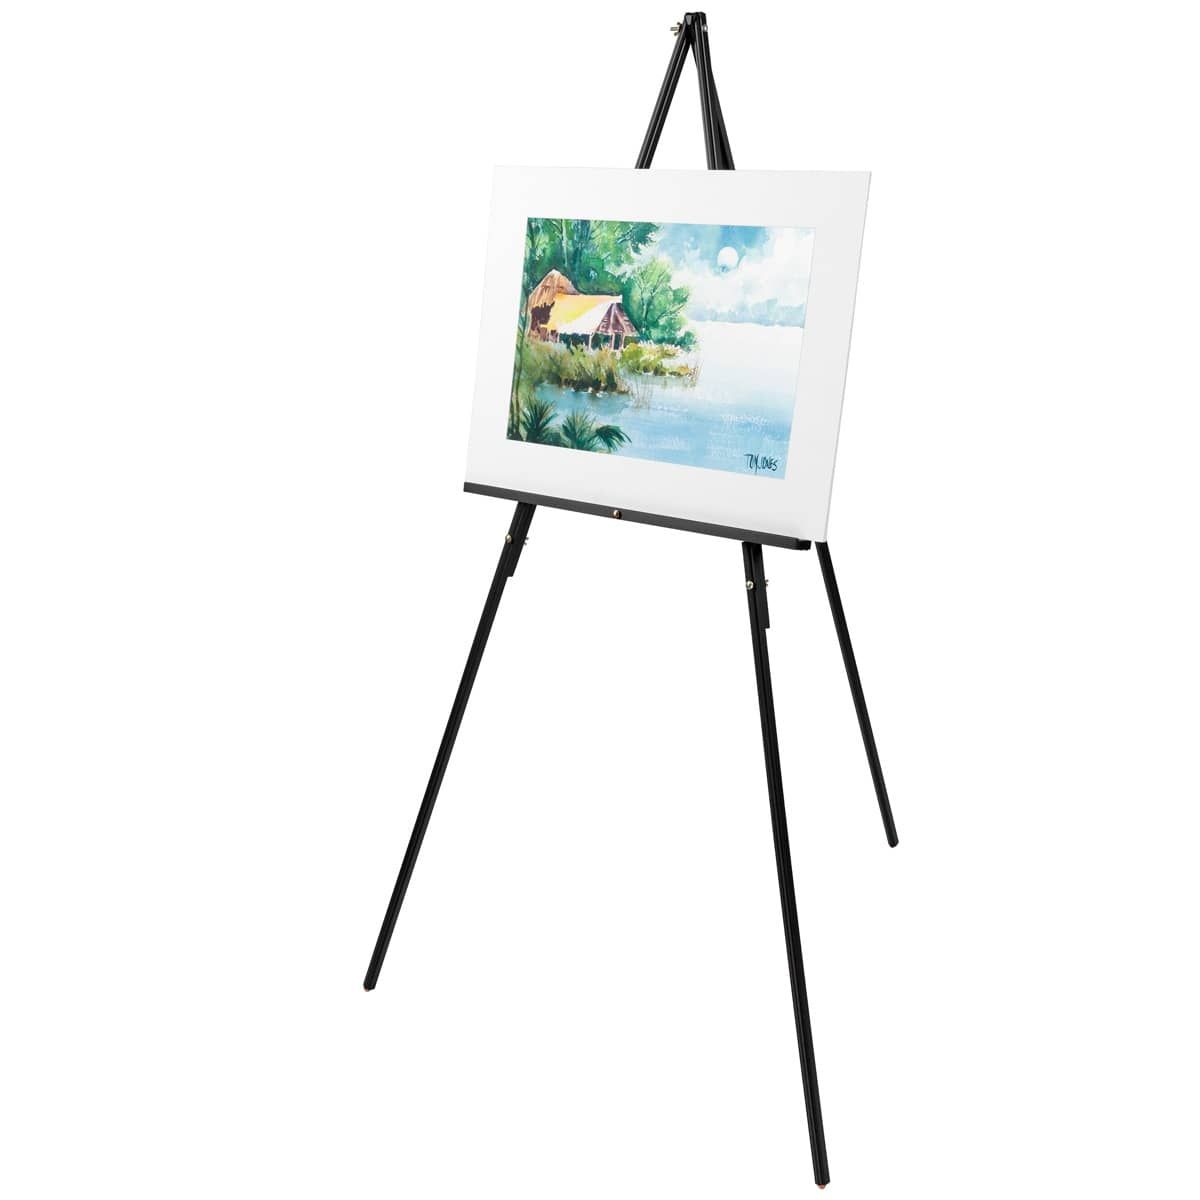 3 Easels for display and presentation - arts & crafts - by owner